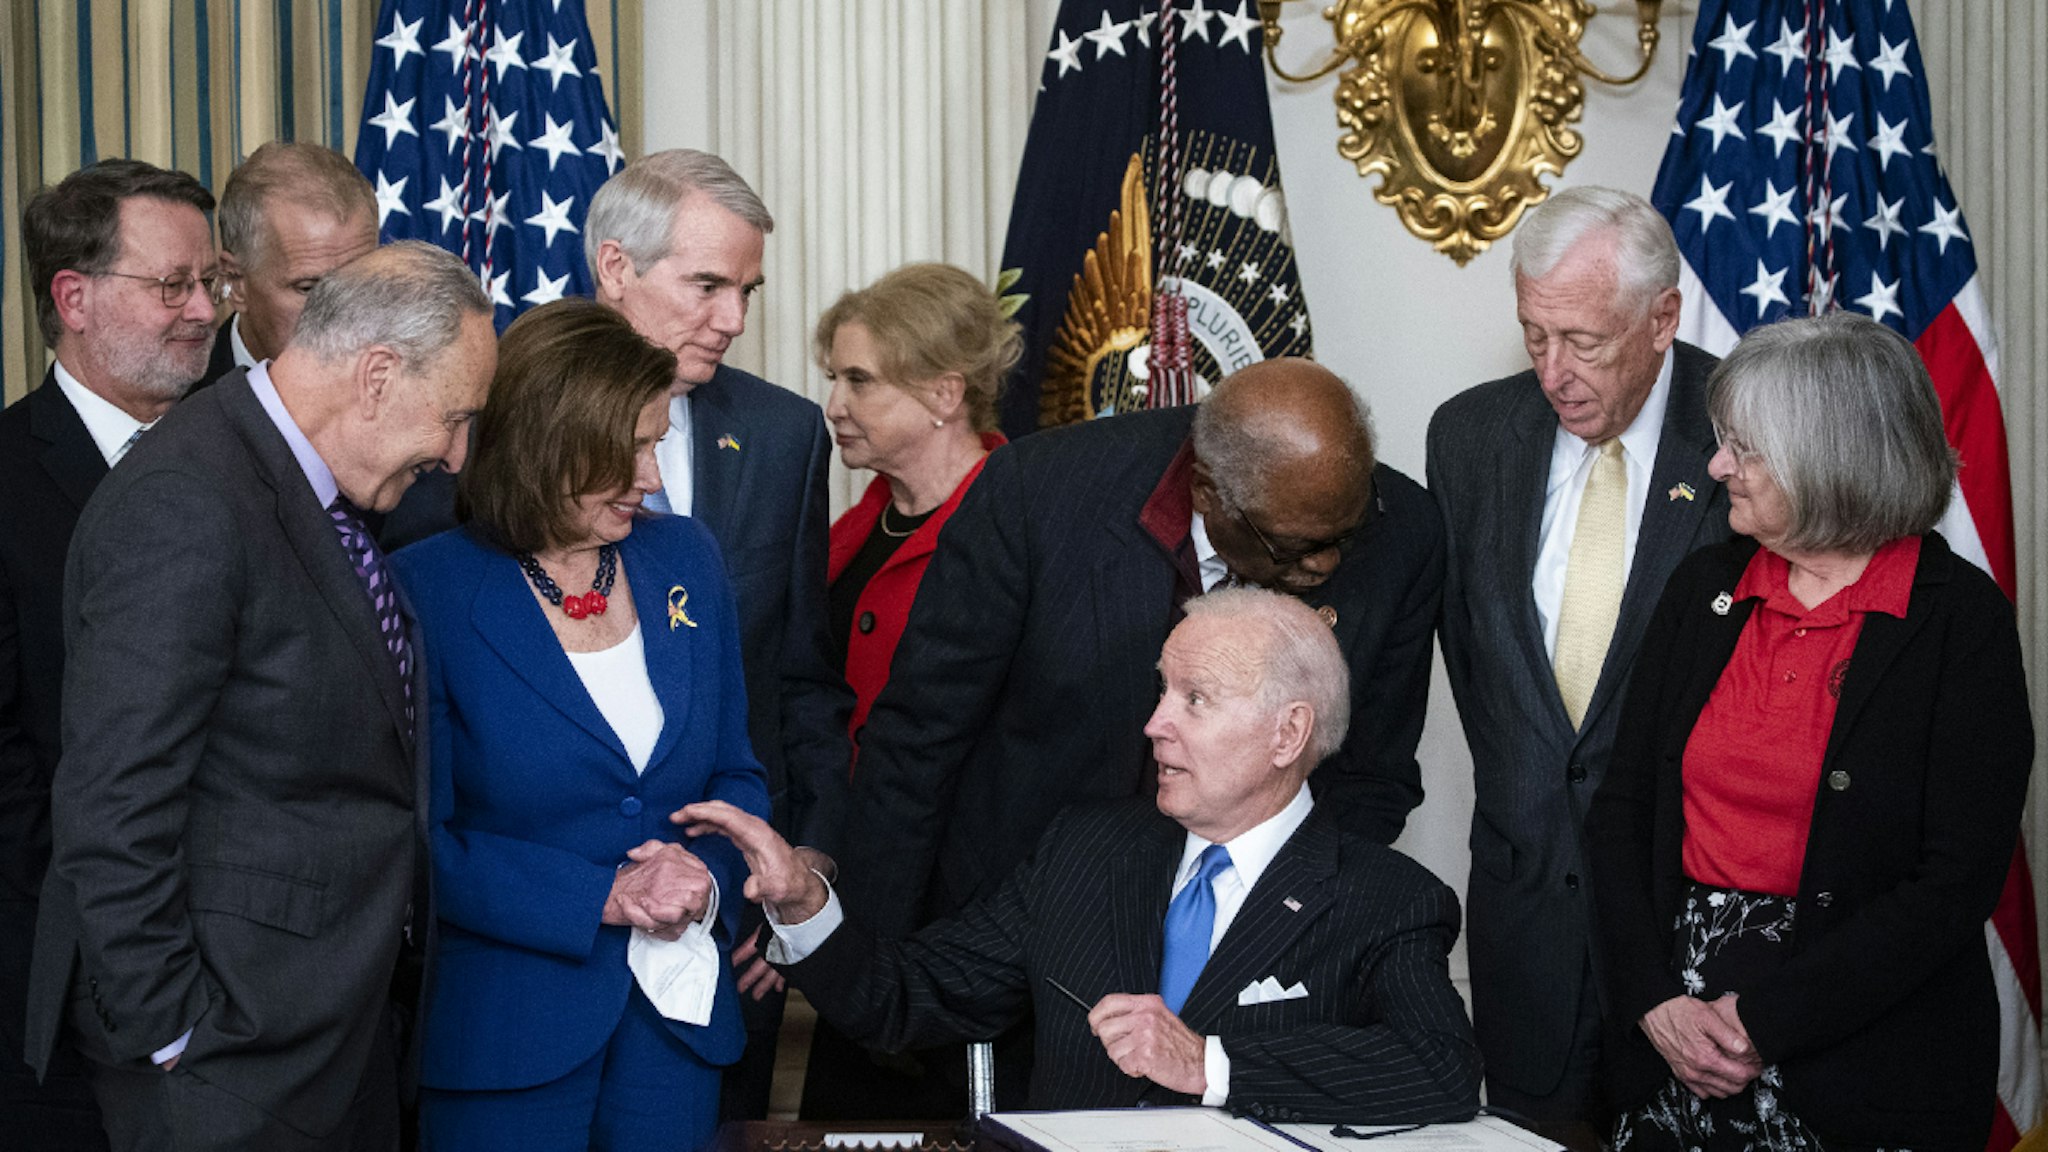 U.S. President Joe Biden speaks with U.S. House Speaker Nancy Pelosi, a Democrat from California, and Senate Majority Leader Chuck Schumer, a Democrat from New York, before signing H.R. 3076, the Postal Service Reform Act of 2022, in the State Dining Room of the White House in Washington, D.C., U.S., on Wednesday, April 6, 2022.